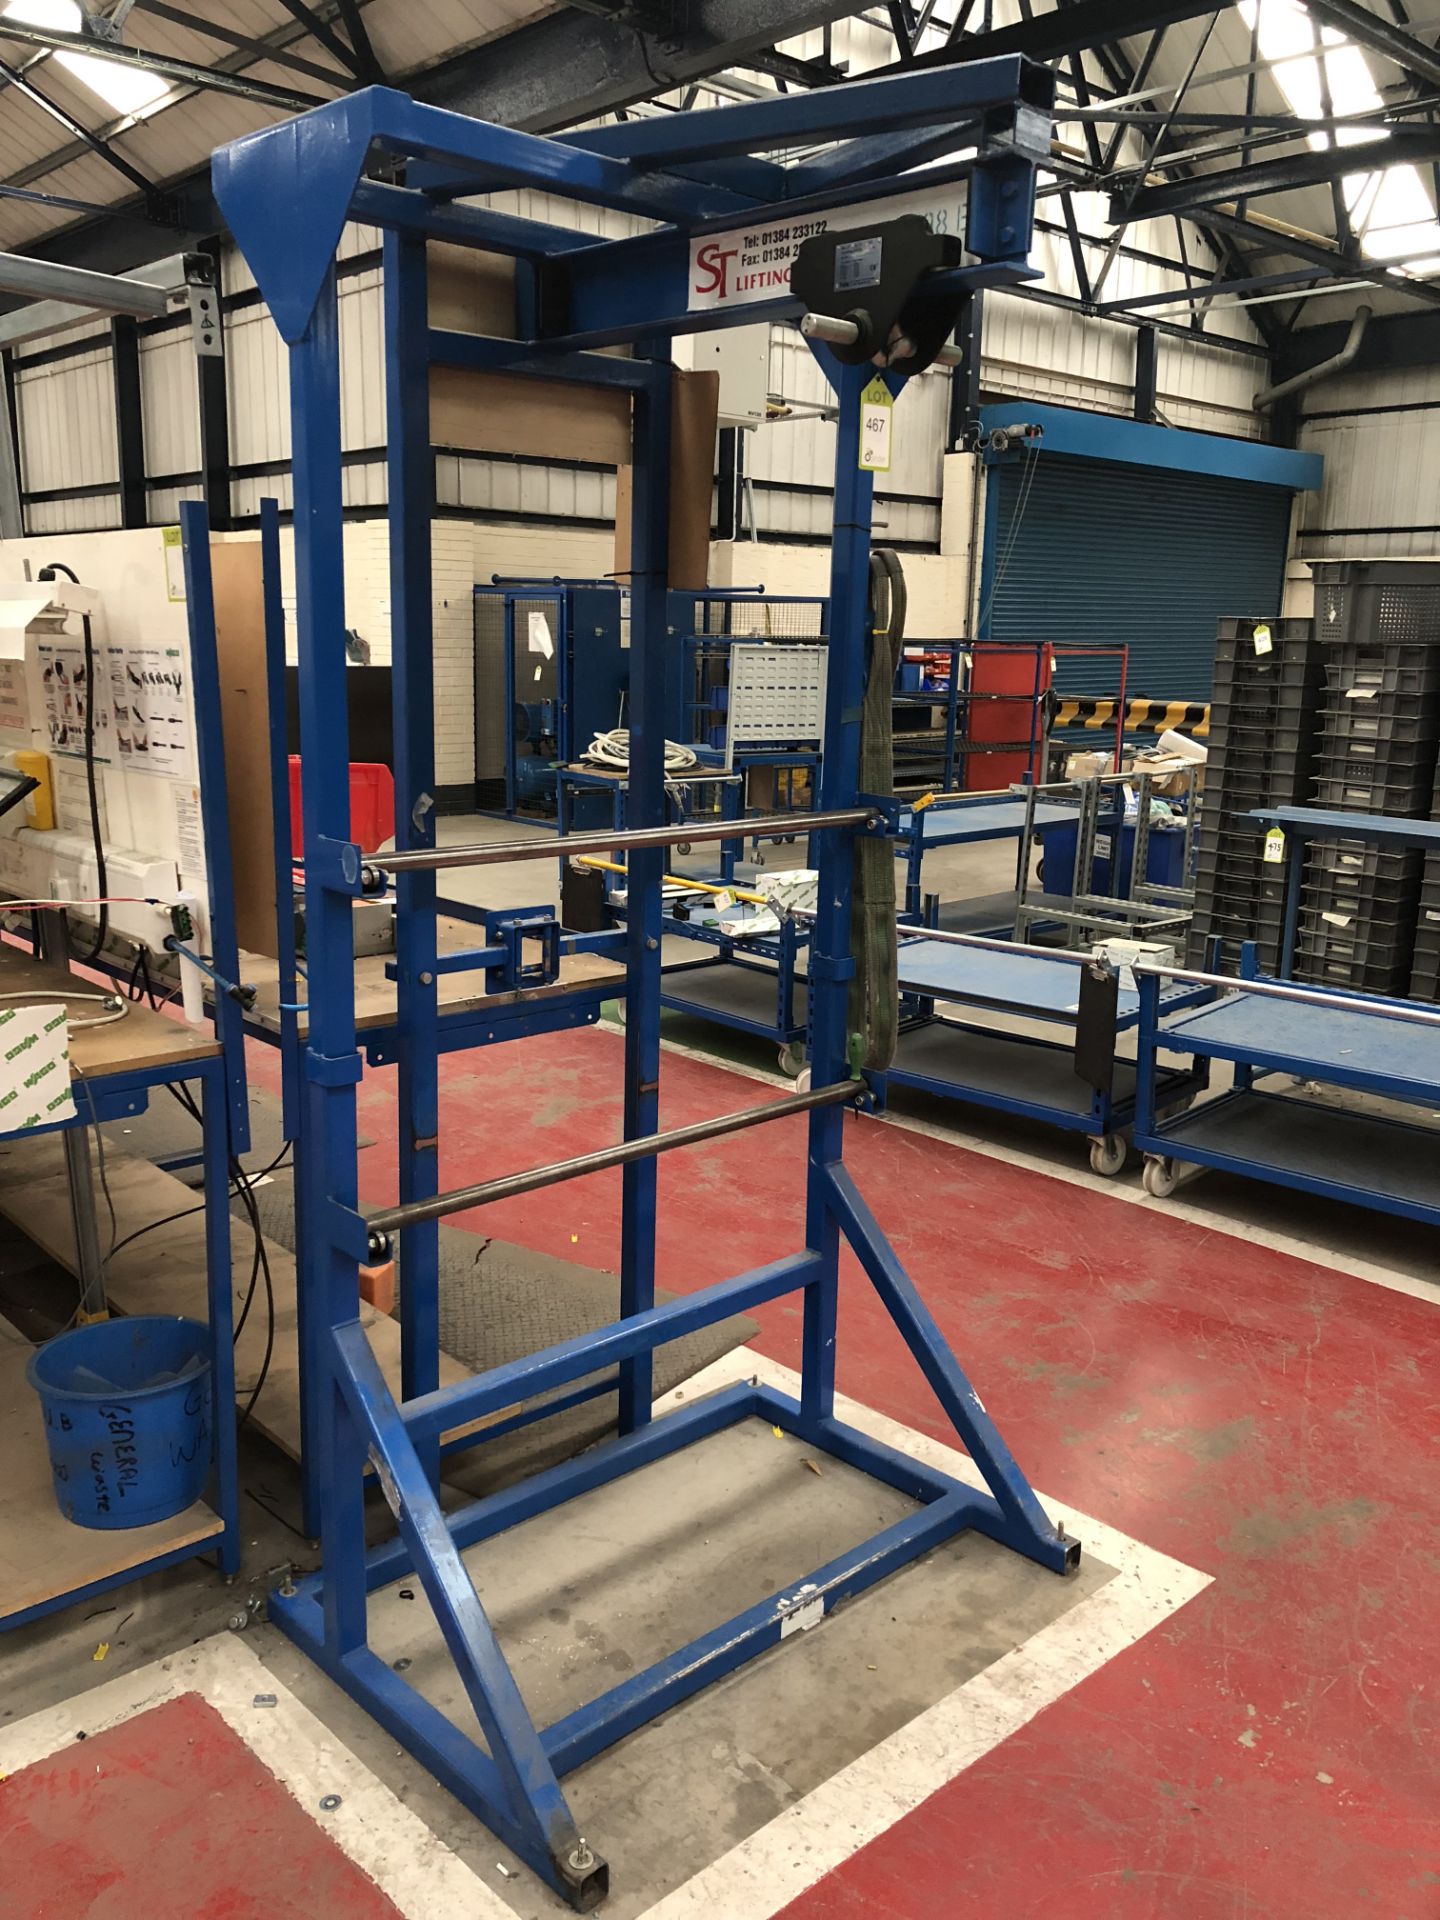 Fabricated Cable Roll Dispensing Gantry (located in Bay 4)